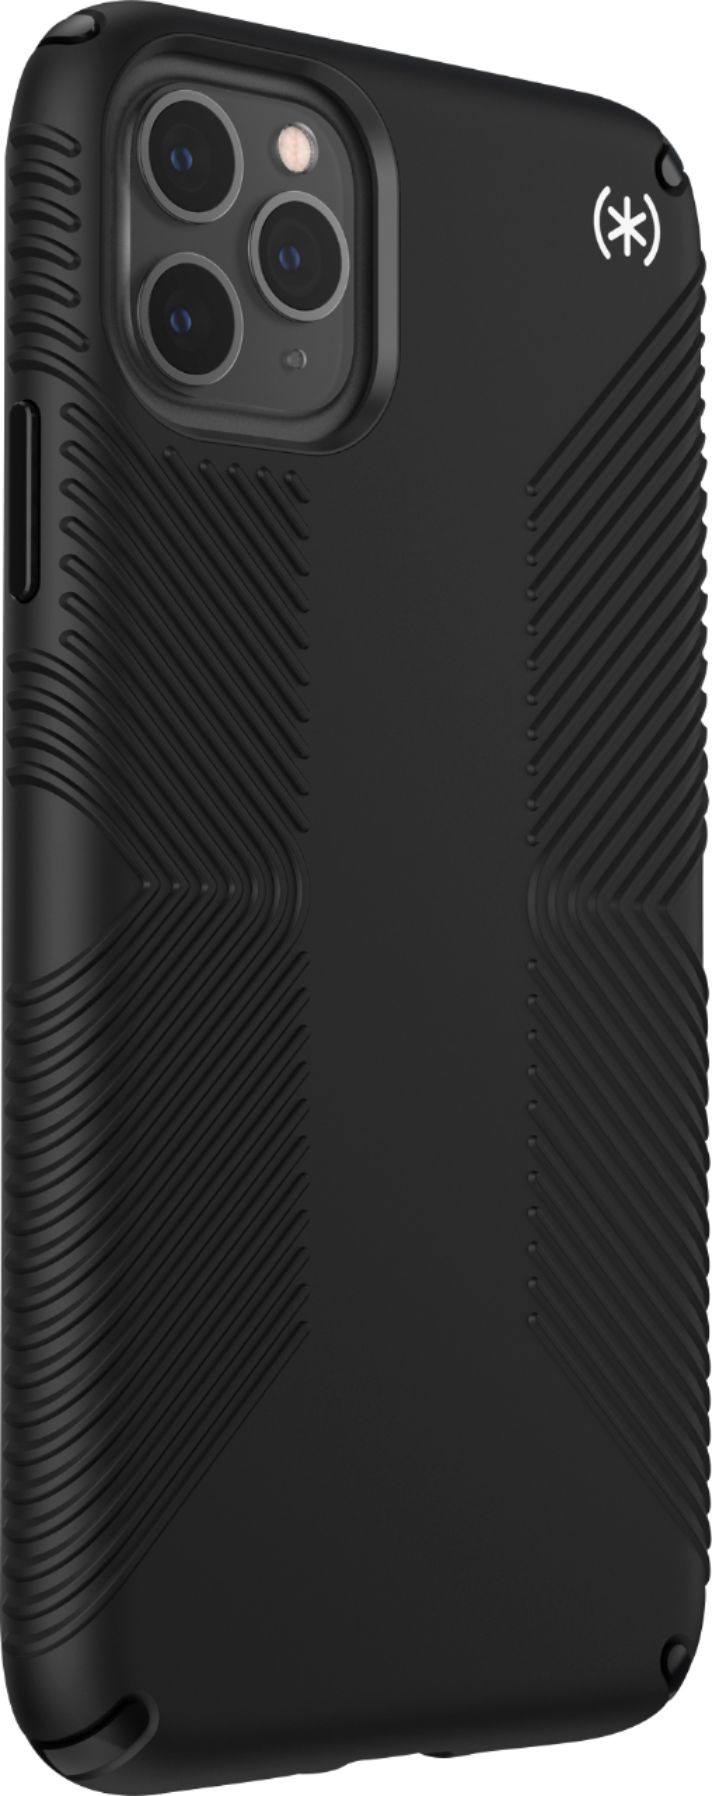 Angle View: Apple - Geek Squad Certified Refurbished iPhone 11 Pro Max Smart Battery Case - Black